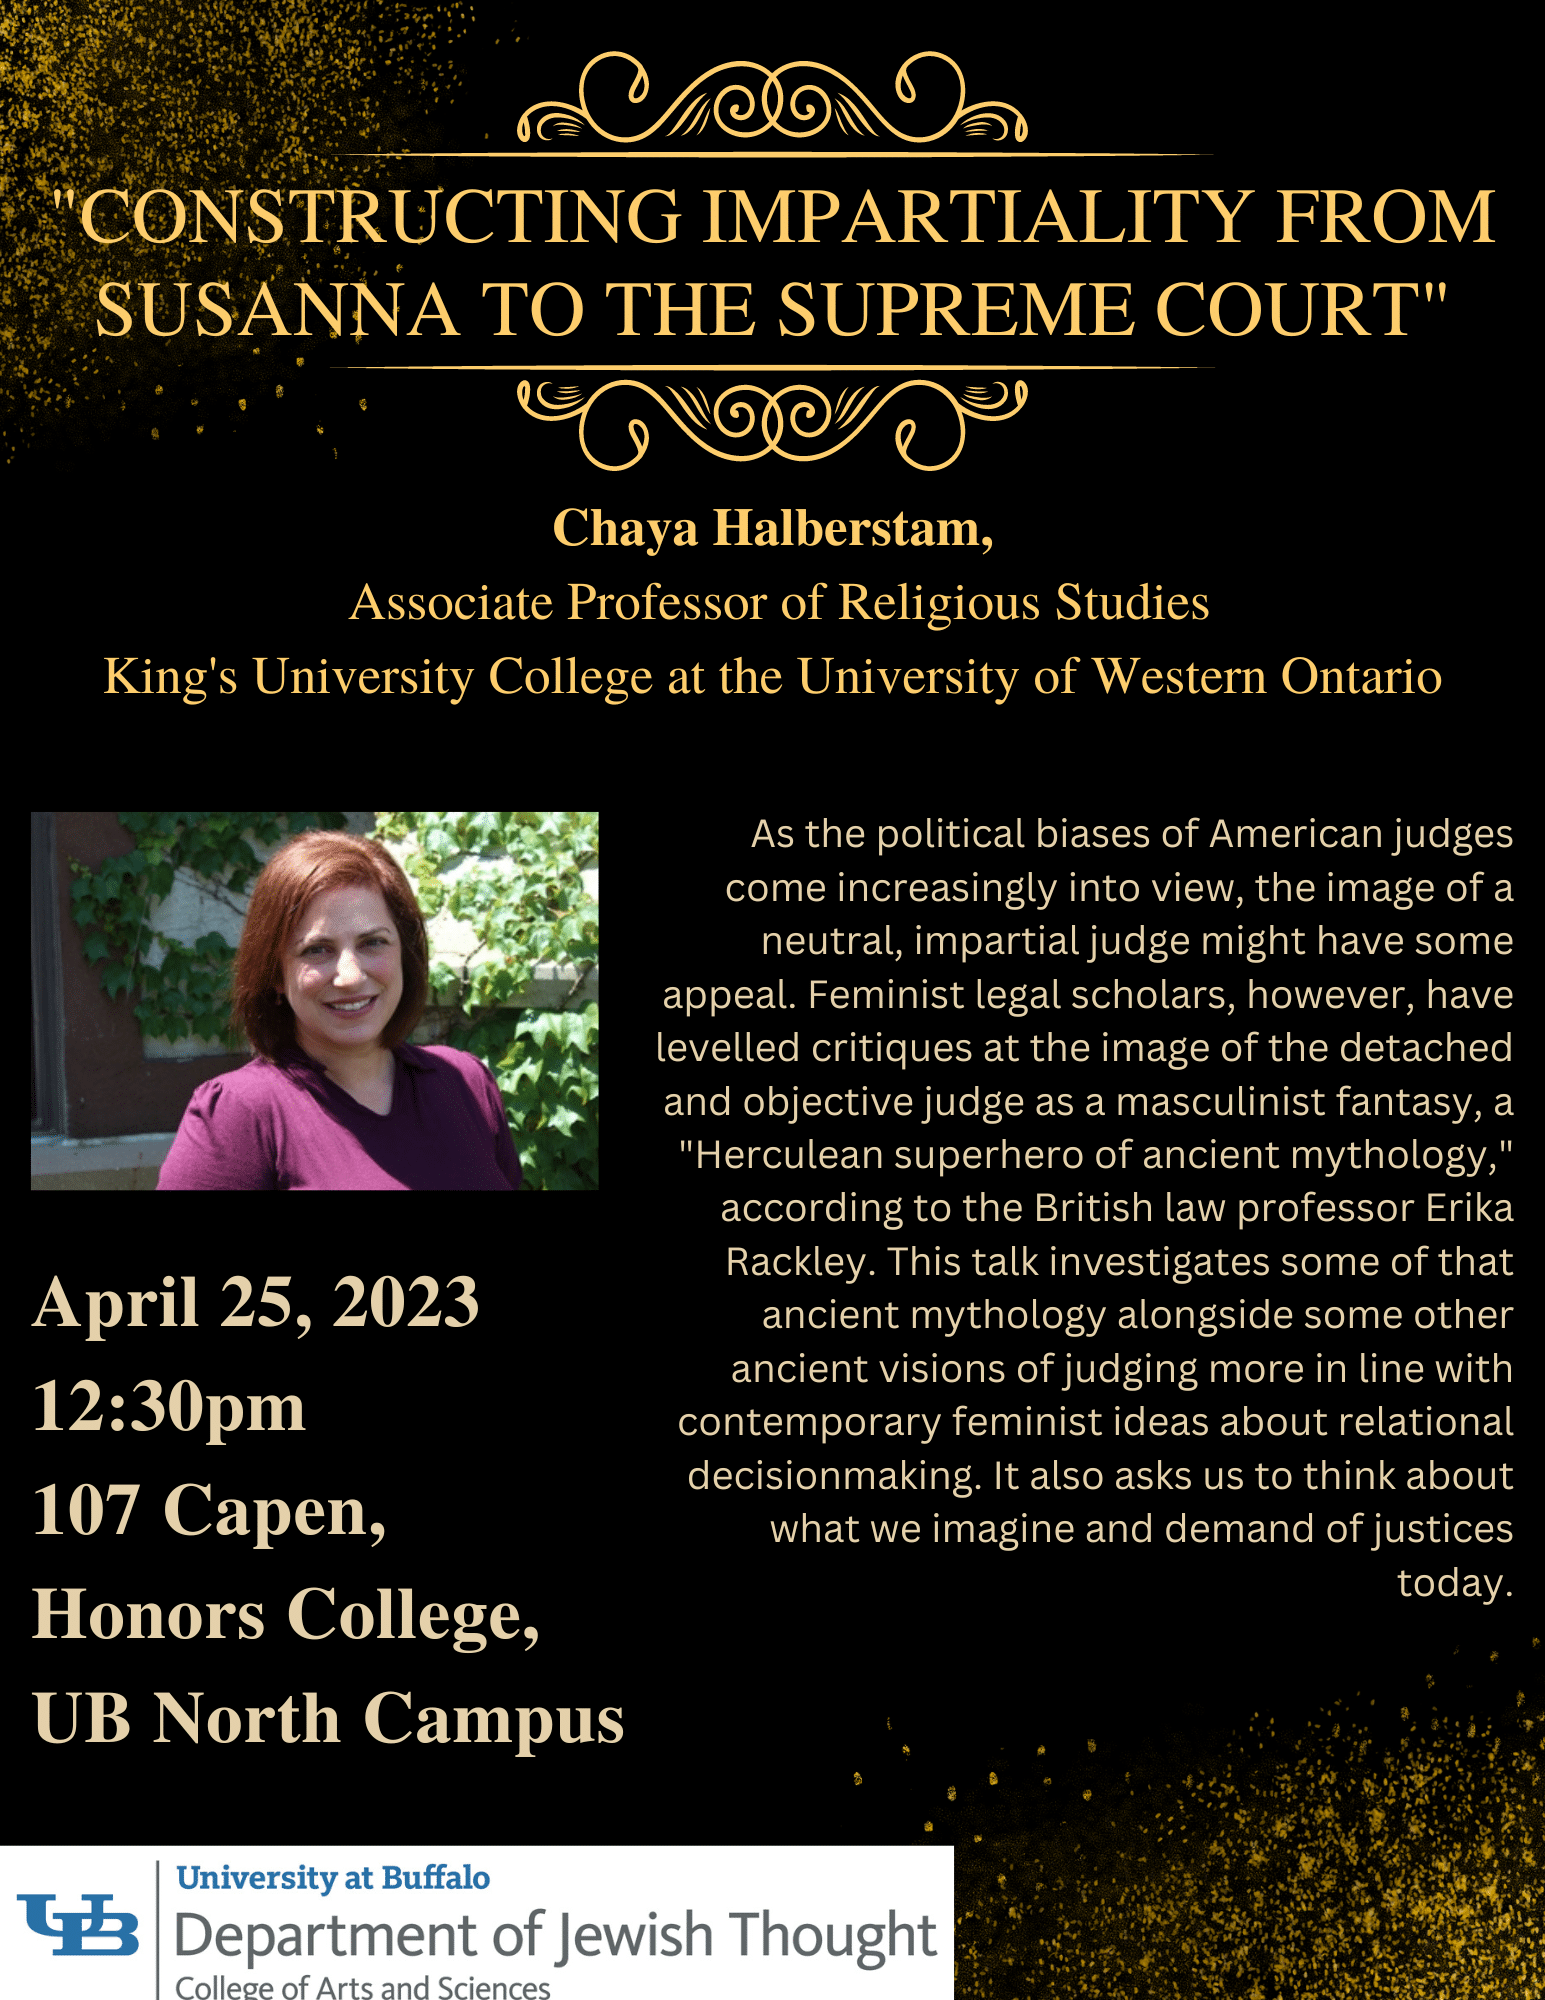 Jewish Thought Lunch & Lecture with Prof. Chaya Halberstam - Constructing Impartiality from Susanna to the Supreme Court